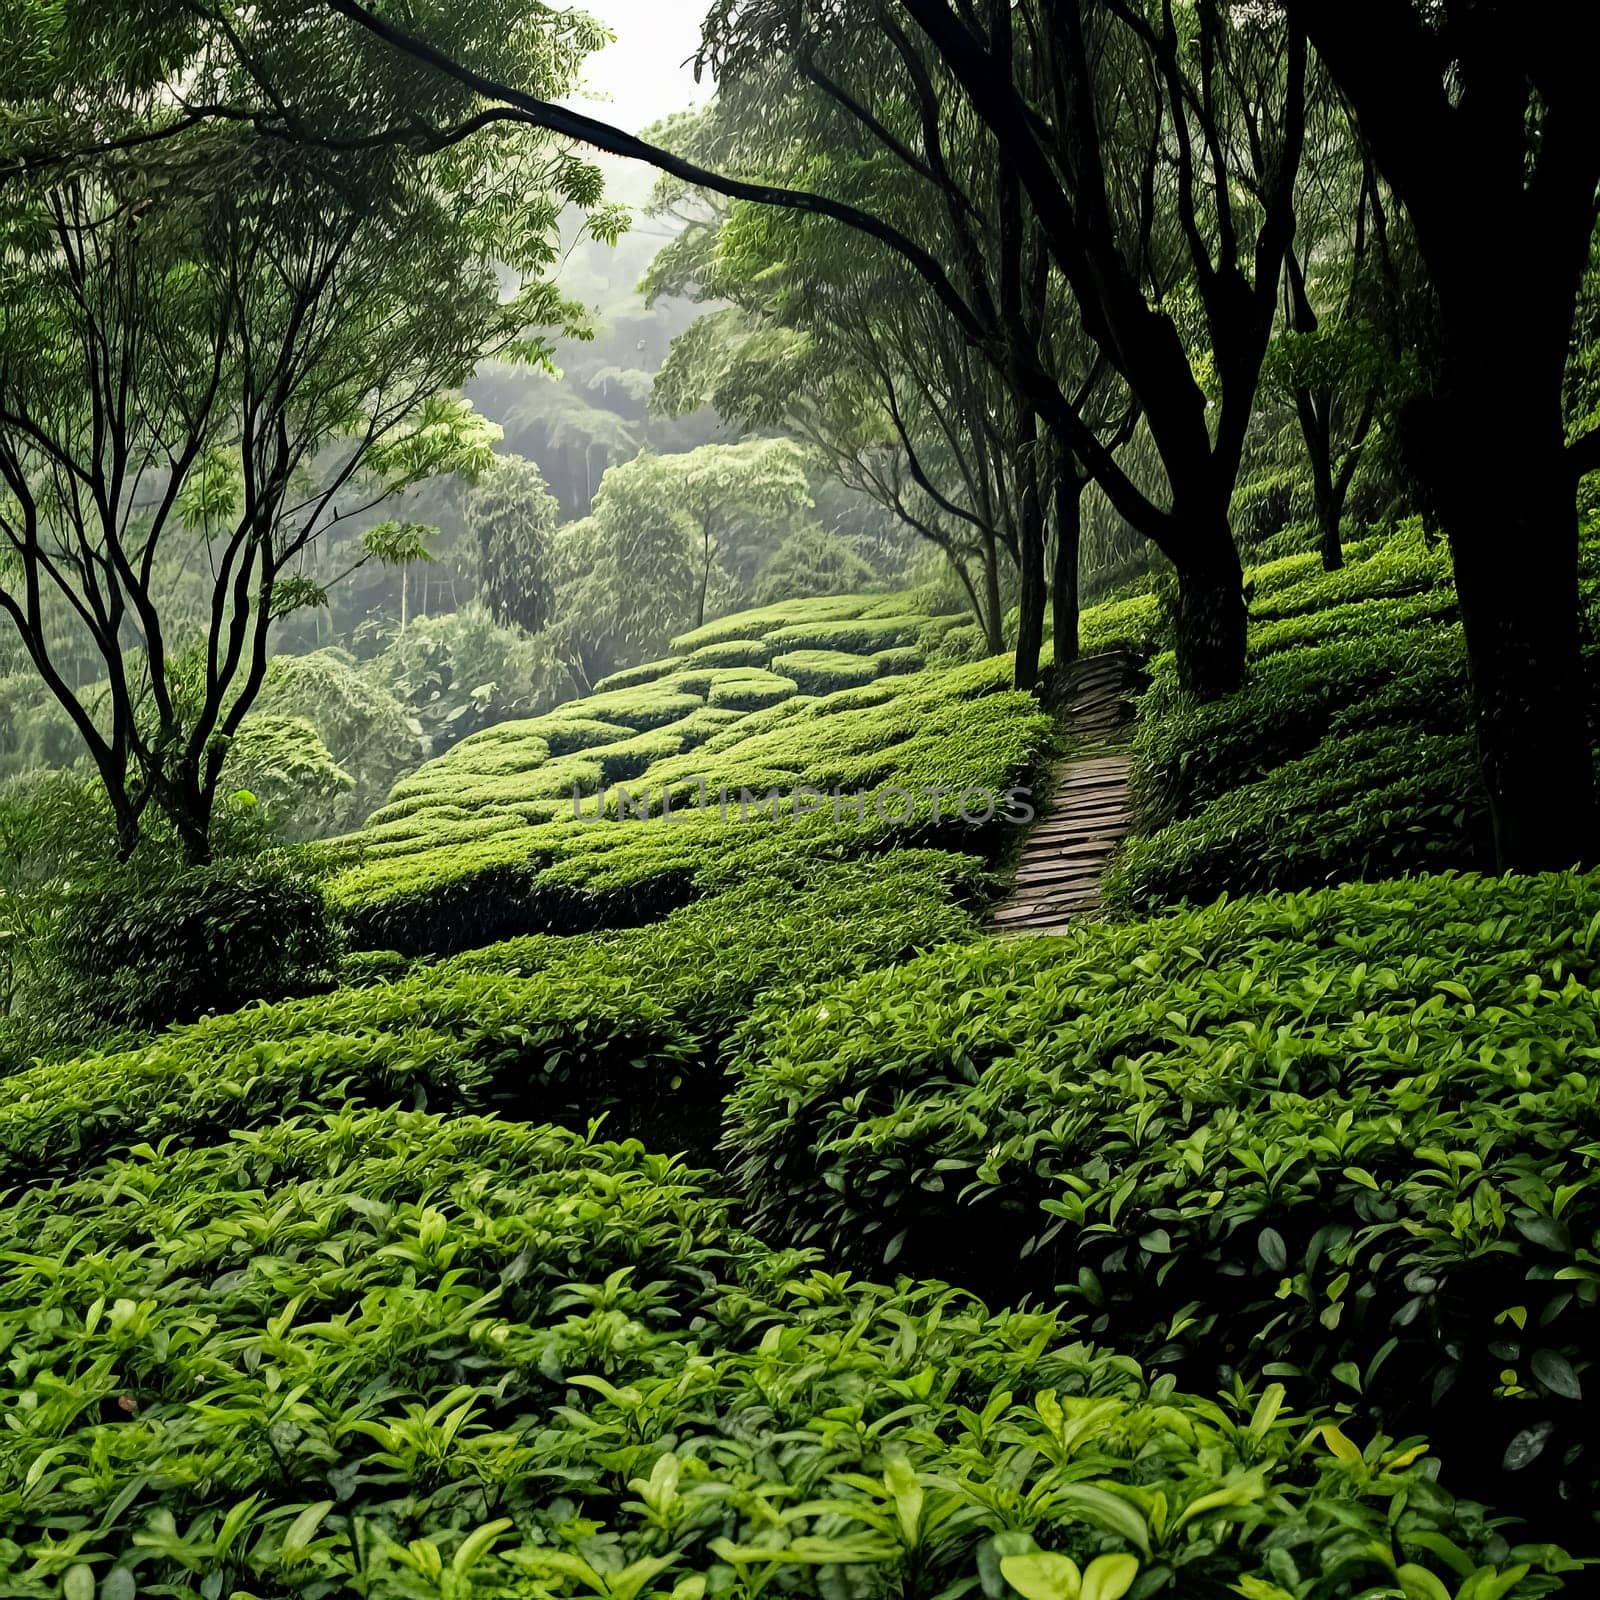 A man is walking through a field of green tea plants. The field is vast and the sun is shining brightly, creating a peaceful and serene atmosphere